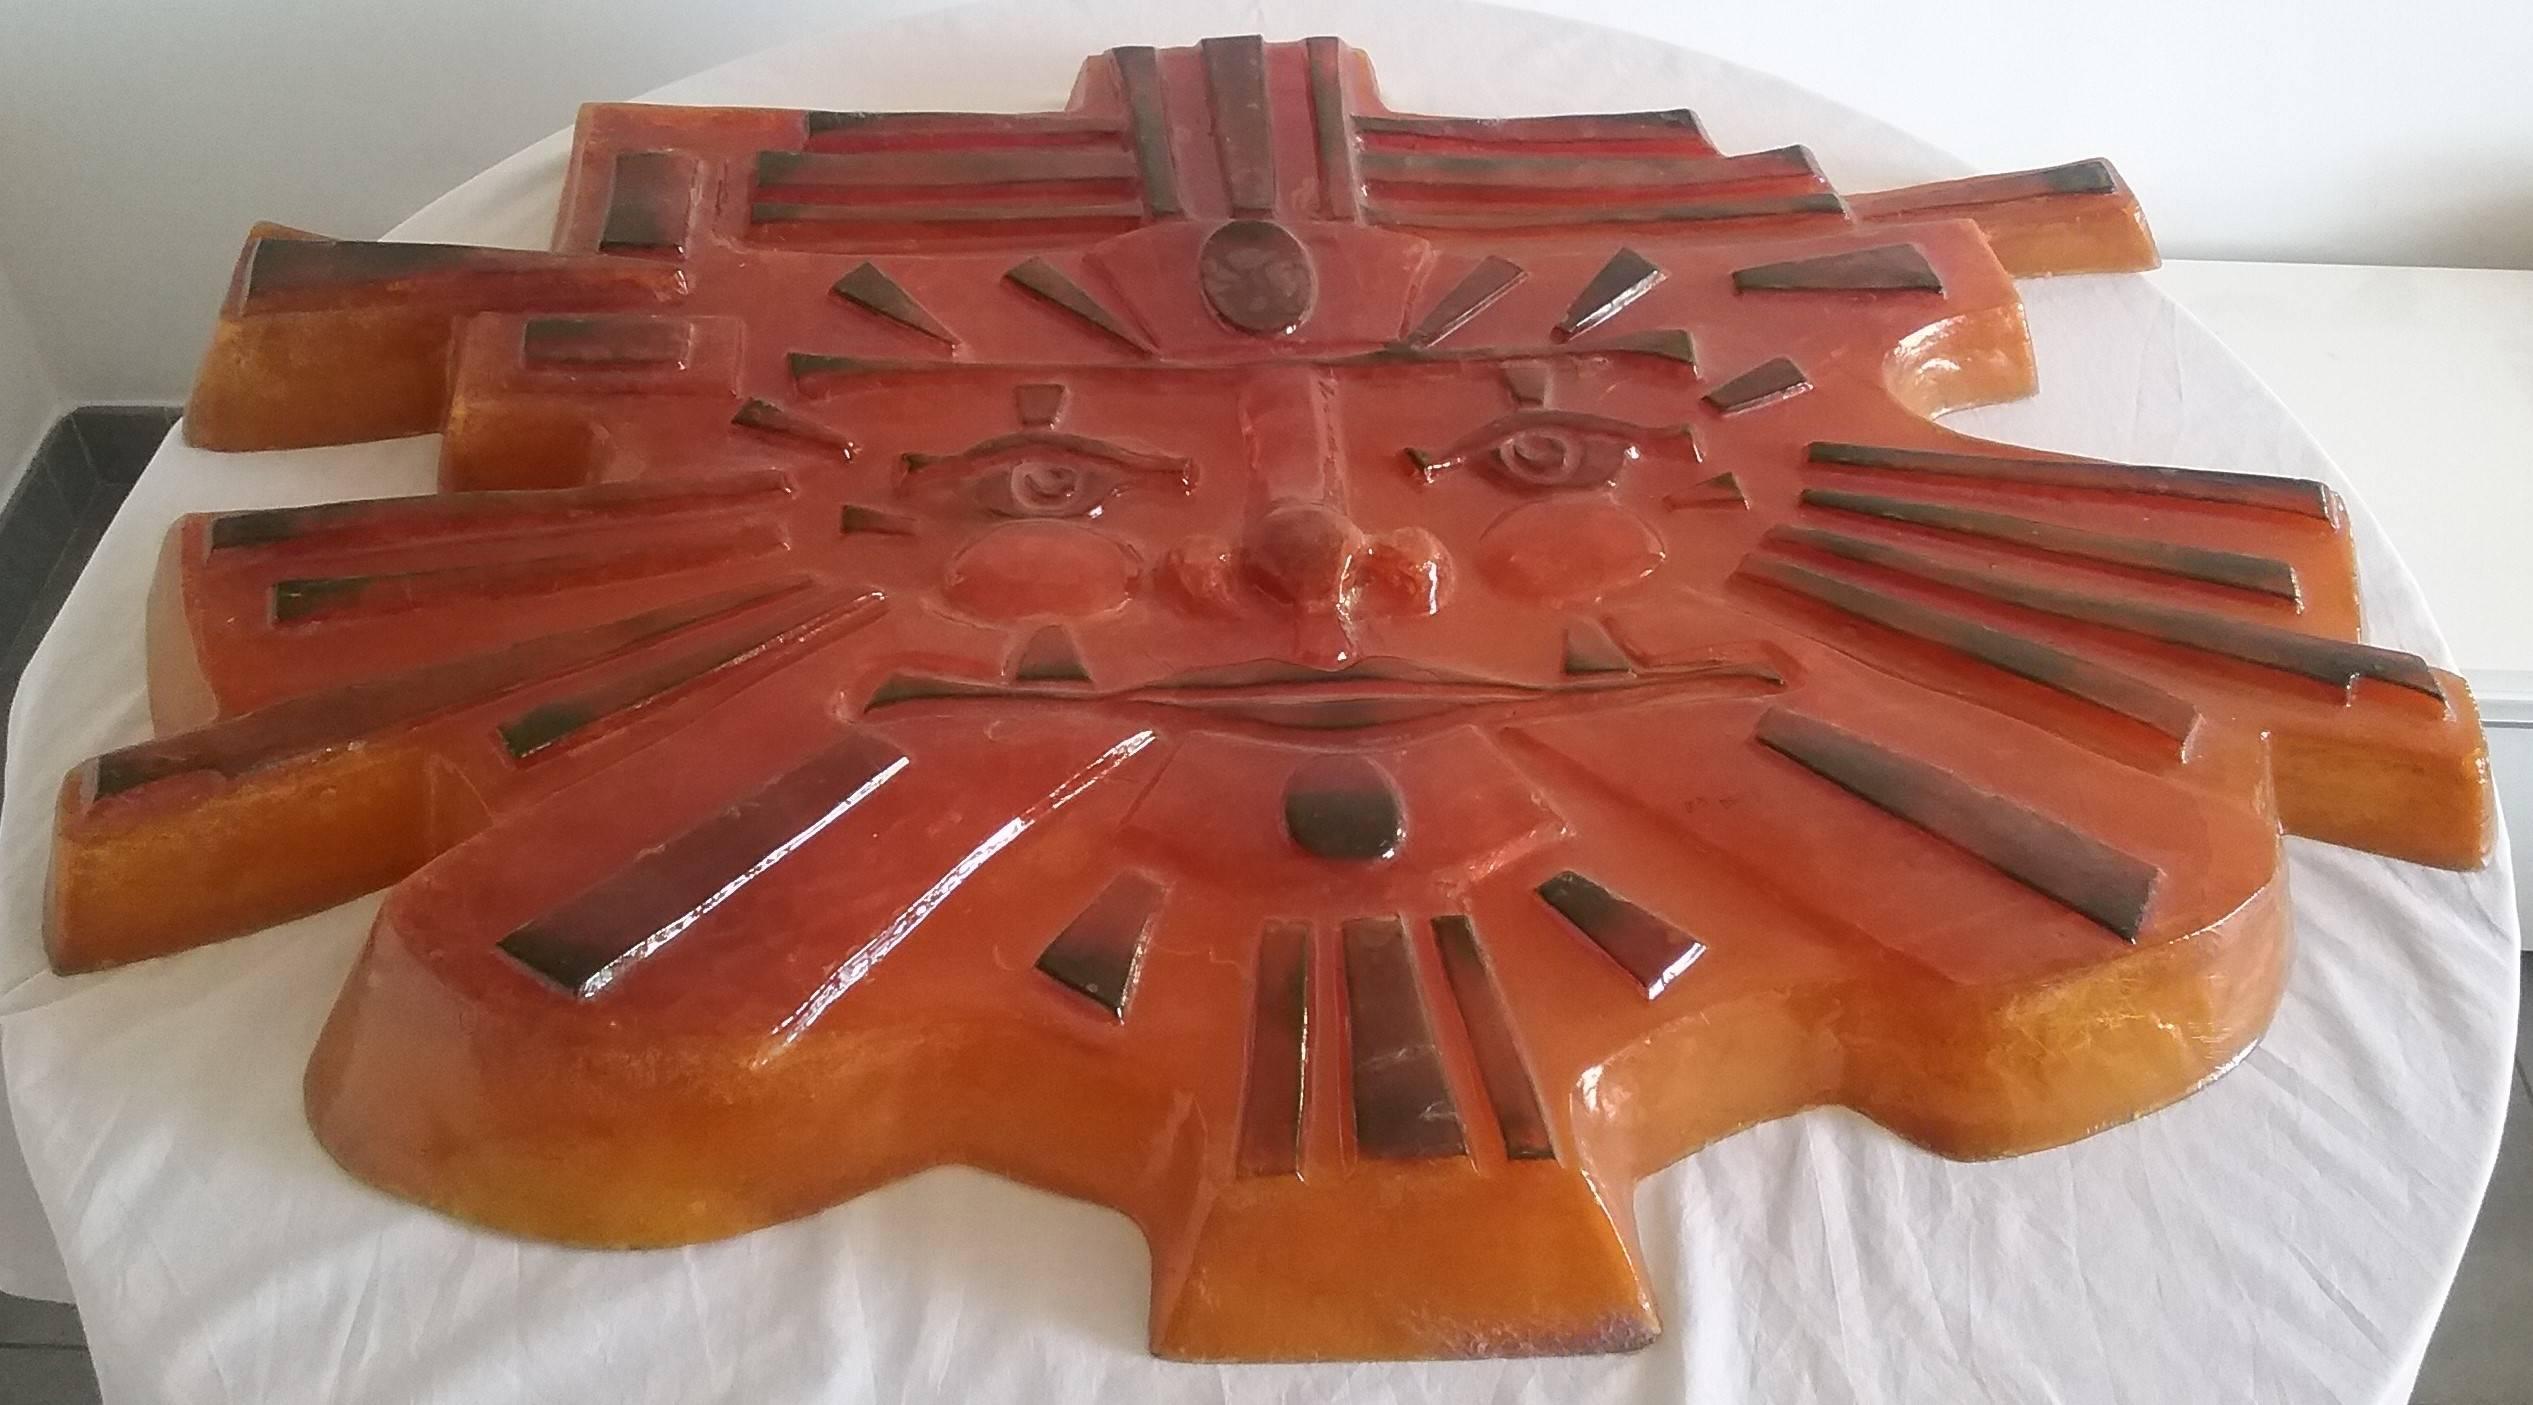 Ornamental wall sculpture signed ES MATTIUS
This artist exposed at Vallauris, French Riviera in 1970s
The wall decoration represents a sunny face or a smiling sun.
Several more or less dark orange colors are present, aspect cracked on the whole